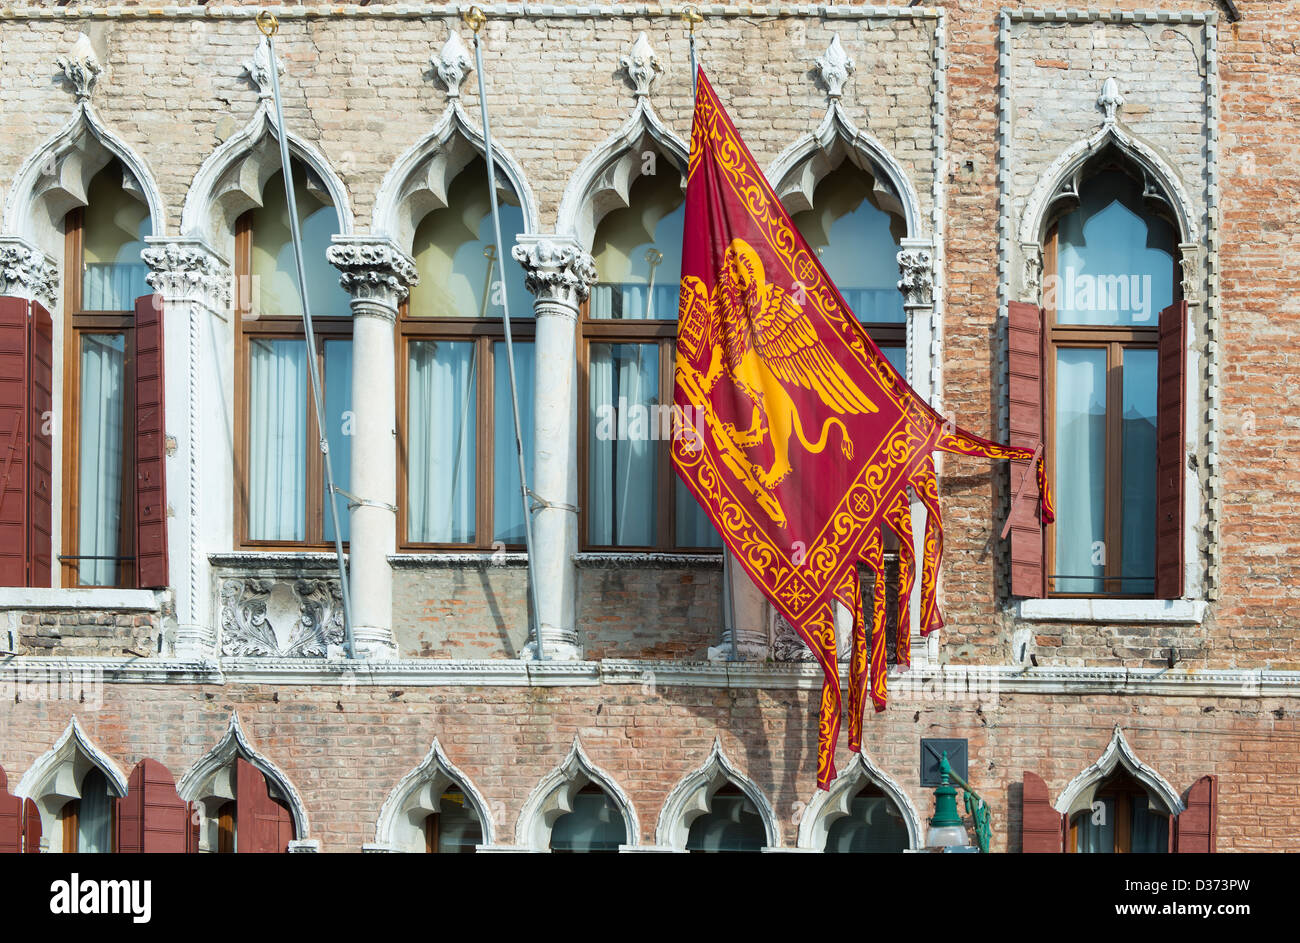 Venetian flag in a palace Stock Photo